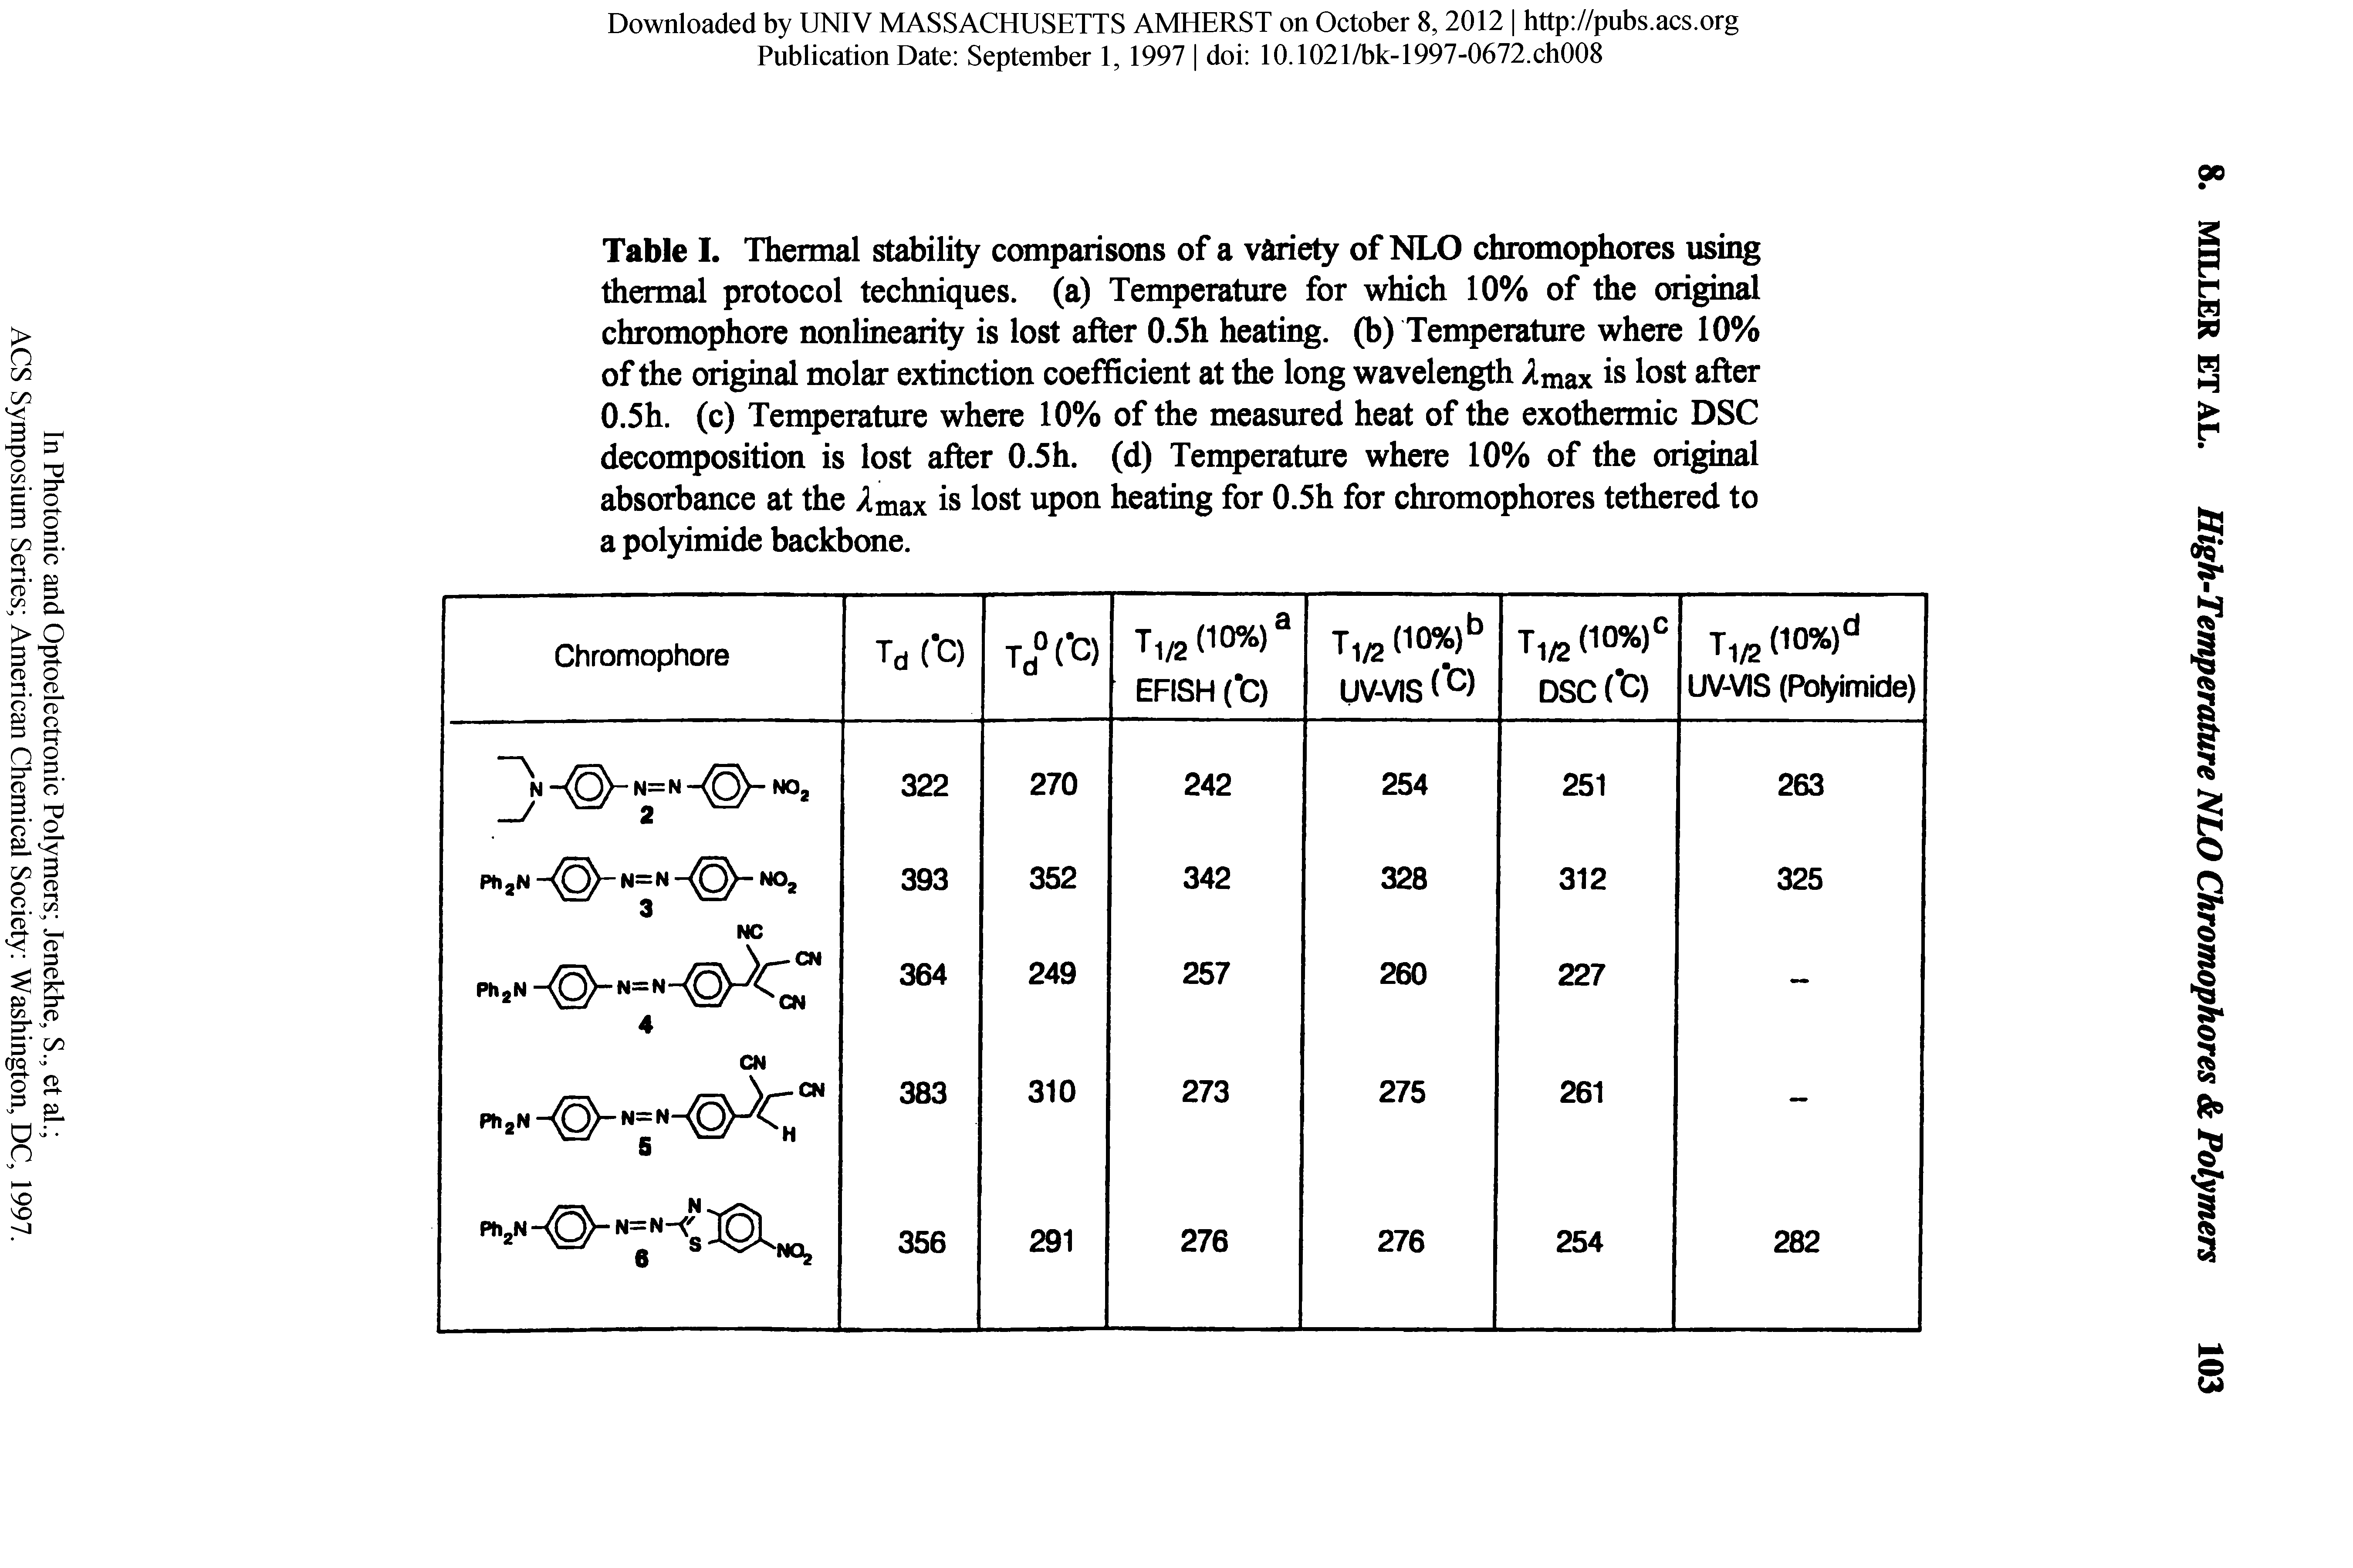 Table I. Thennal stability comparisons of a variety of NLO chromophores using thermal protocol techniques, (a) Temperature for which 10% of the original chromophore nonlinearity is lost after 0.5h heating, (b) Temperature where 10% of the original molar extinction coefficient at the long wavelength max is lost after 0.5h. (c) Temperature where 10% of the measured heat of the exothermic DSC decomposition is lost after 0.5h. (d) Temperature where 10% of the original absorbance at the max is lost upon heating for 0.5h for chromophores tethered to a polyimide backbone.